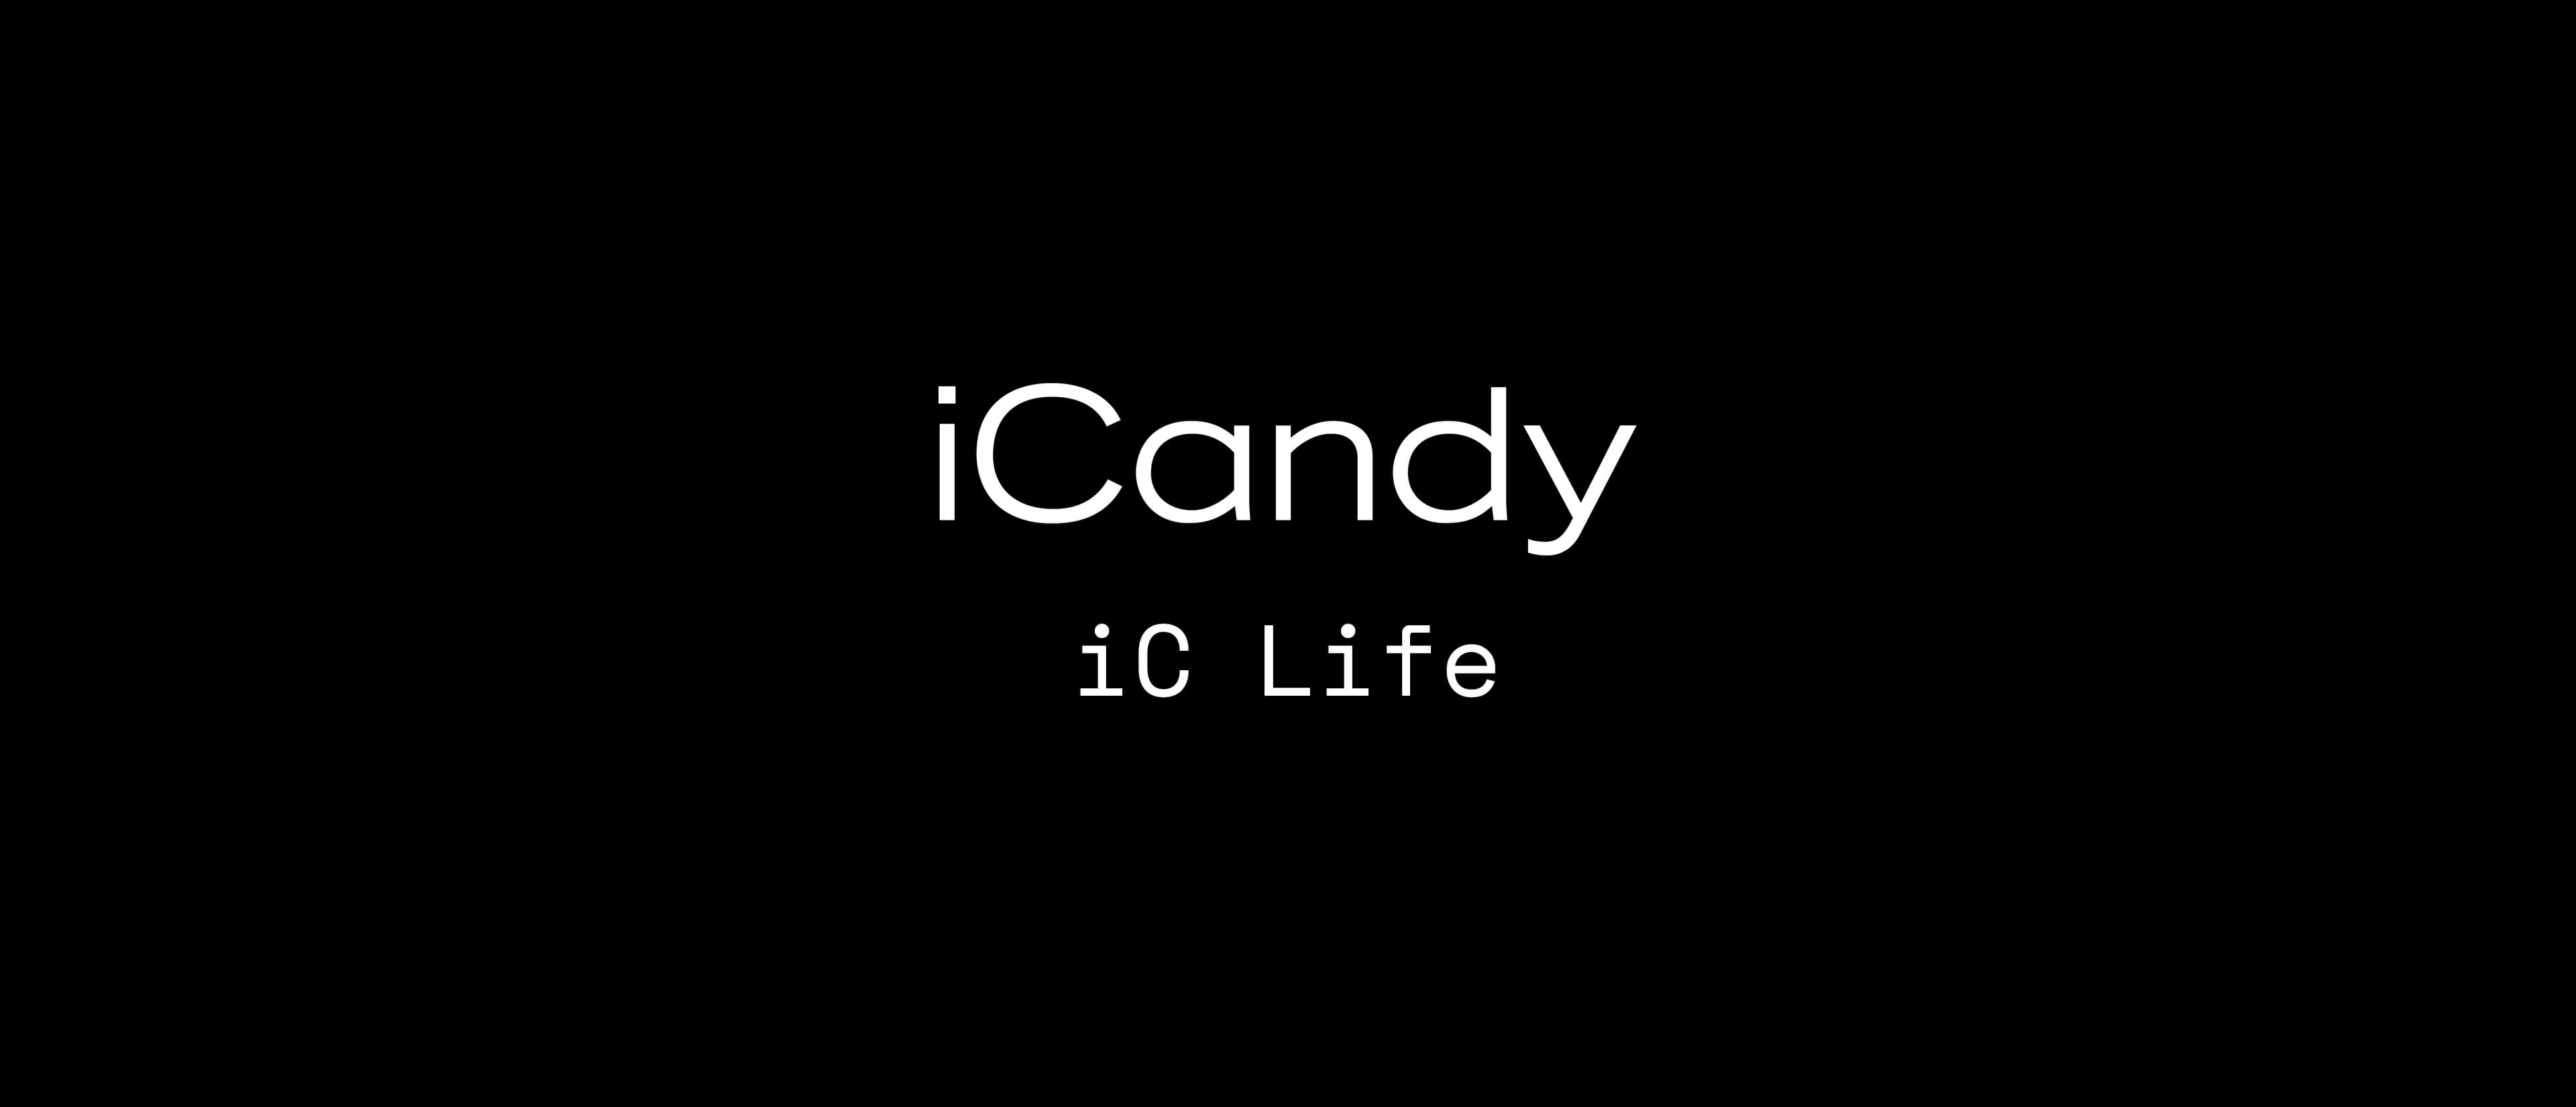 Caroline Watson and the iCandy Peach #MyiCandyStyle